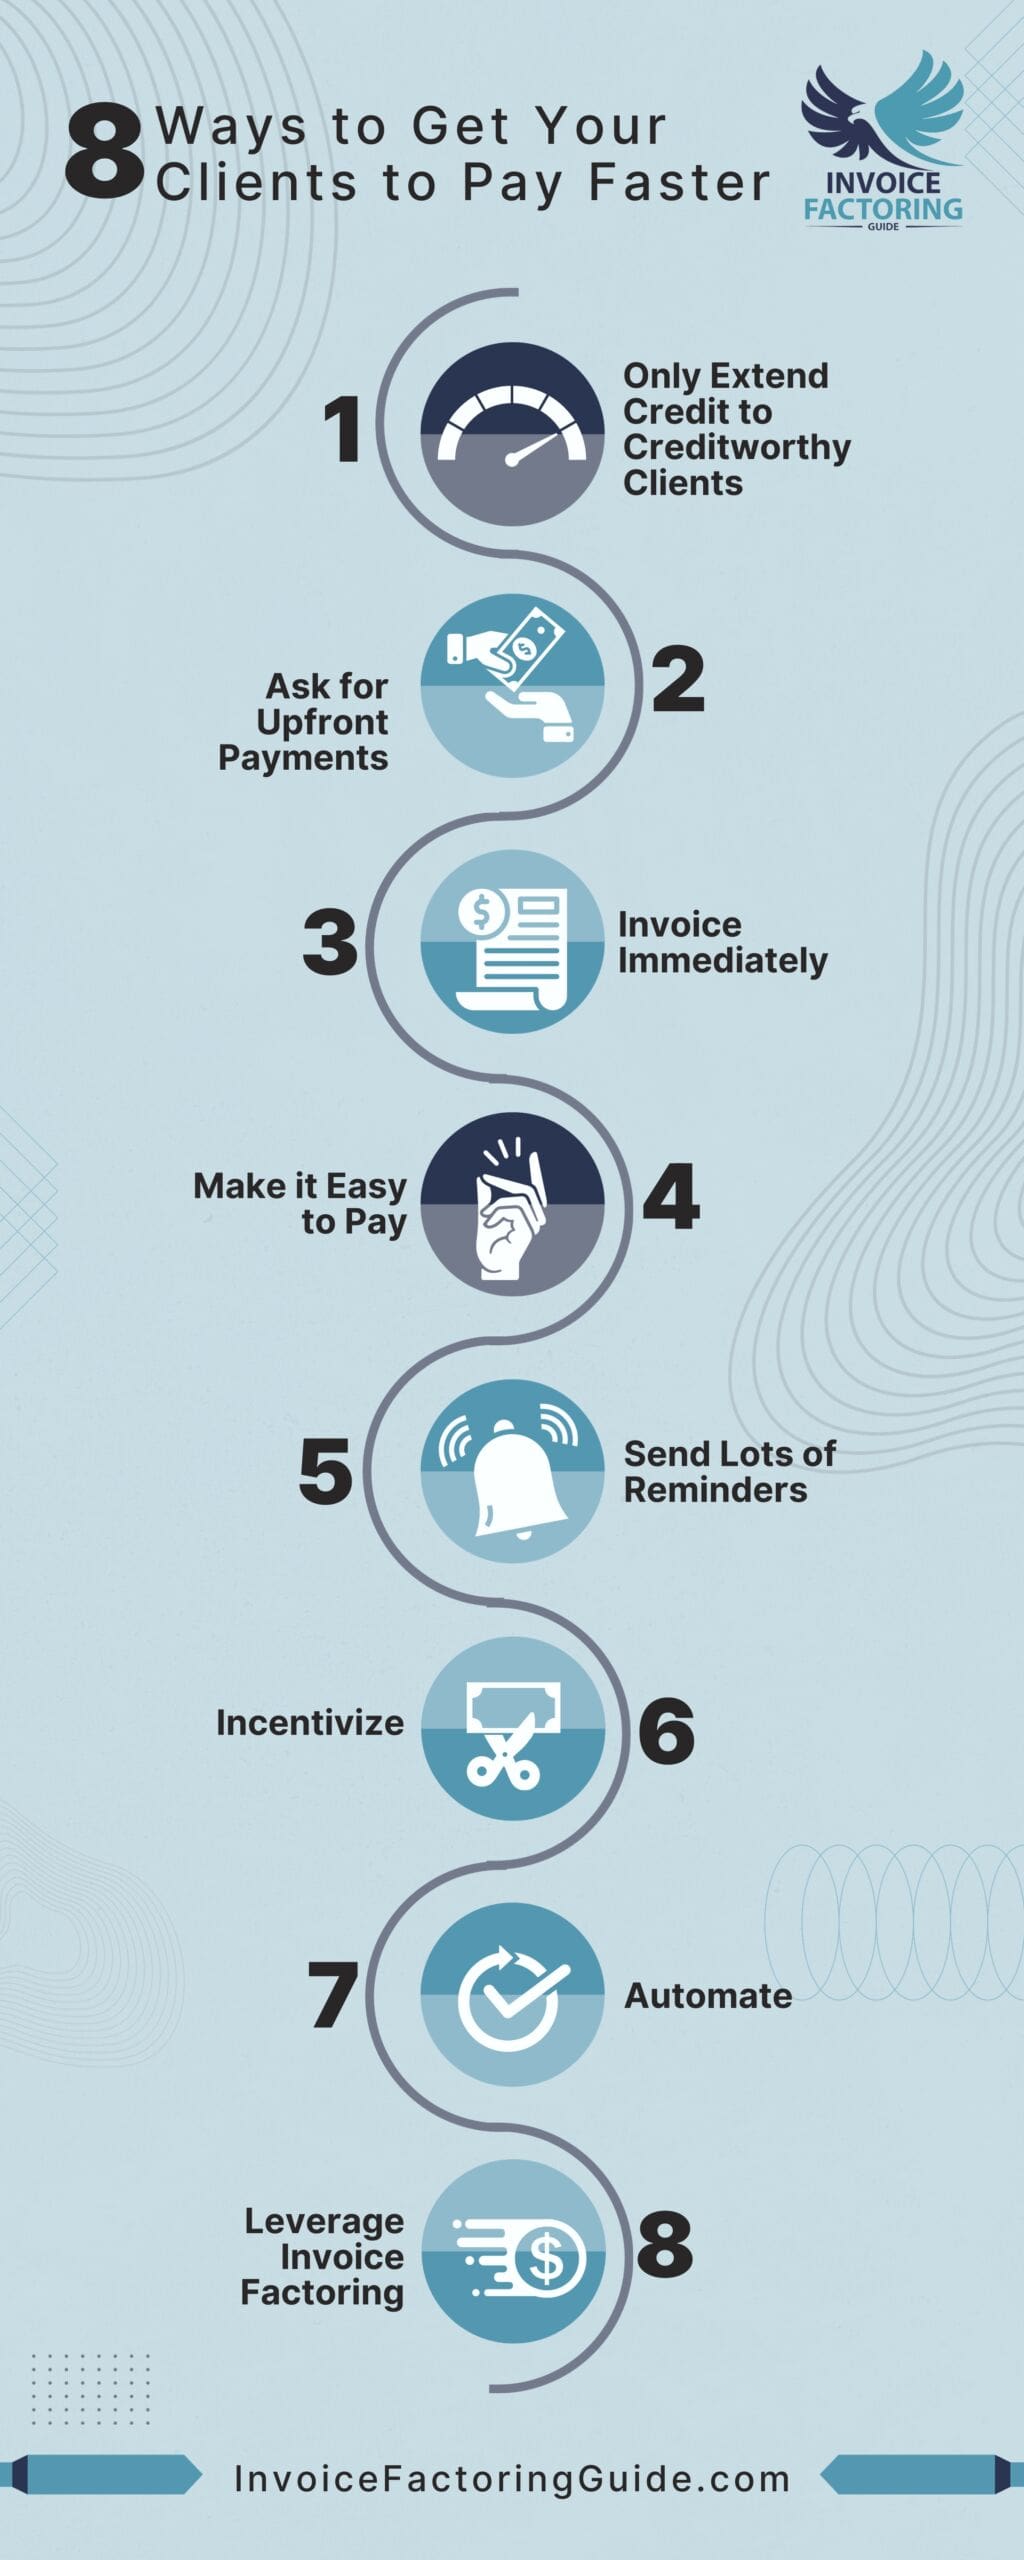 8 Ways to Get Your Clients to Pay Faster